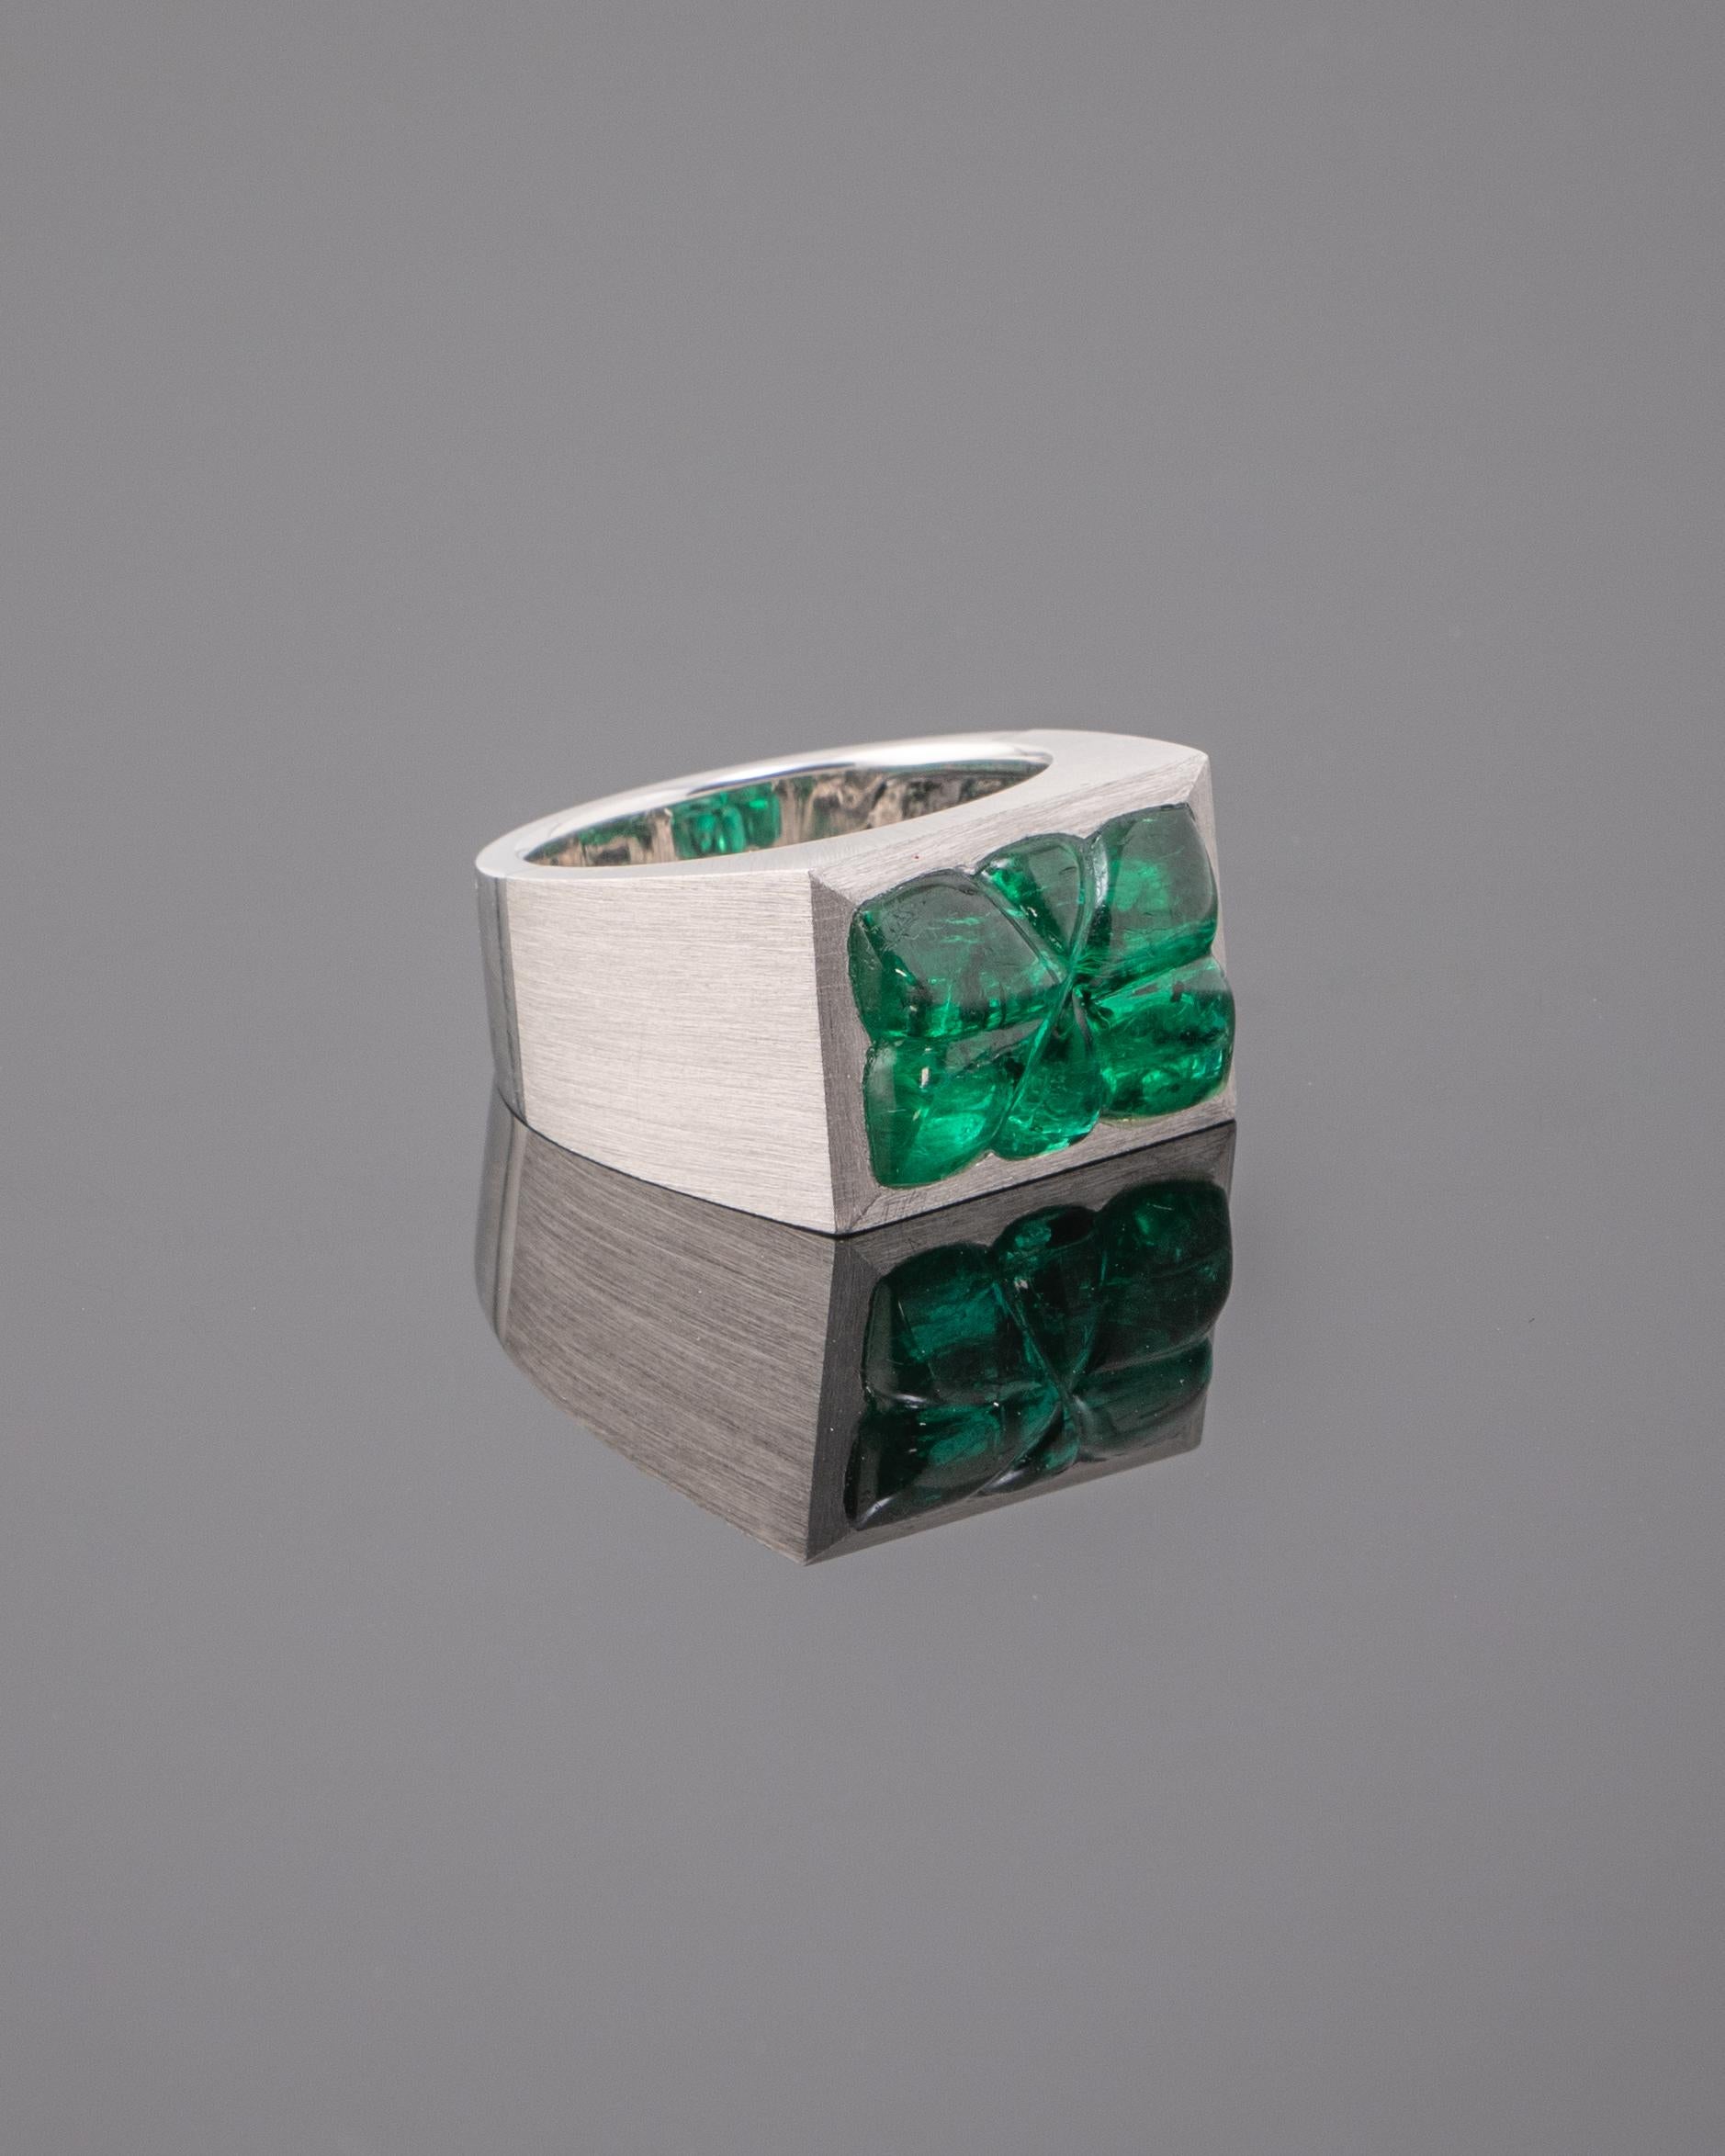 Make a statement with this stunning, unisex, 10.99 carat carved Zambian Emerald centre stone ring -  set in solid 18K white gold, with a matte finish. The carved emerald has a great lustre and is transparent, with a few natural inclusions making it